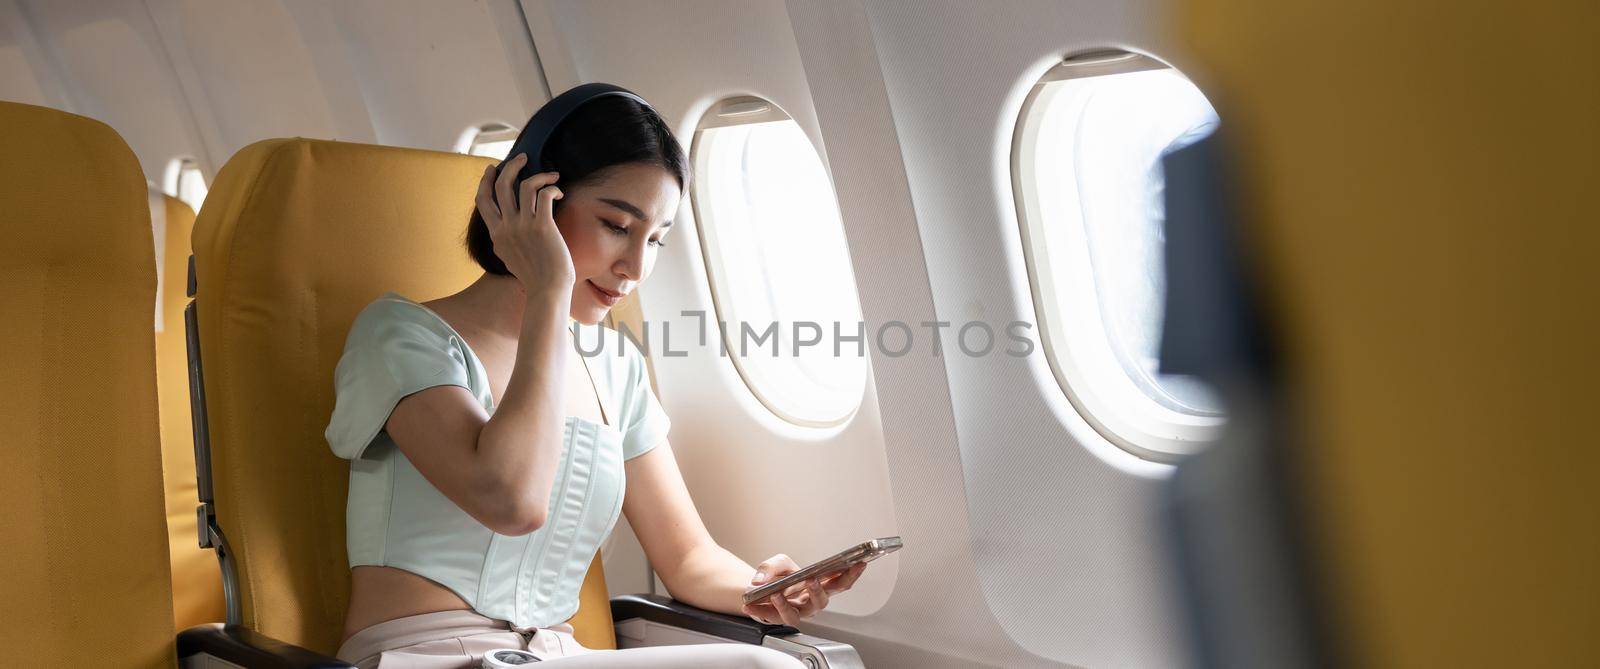 Young woman with mobile phone and headphones listening to music in airplane during flight by nateemee